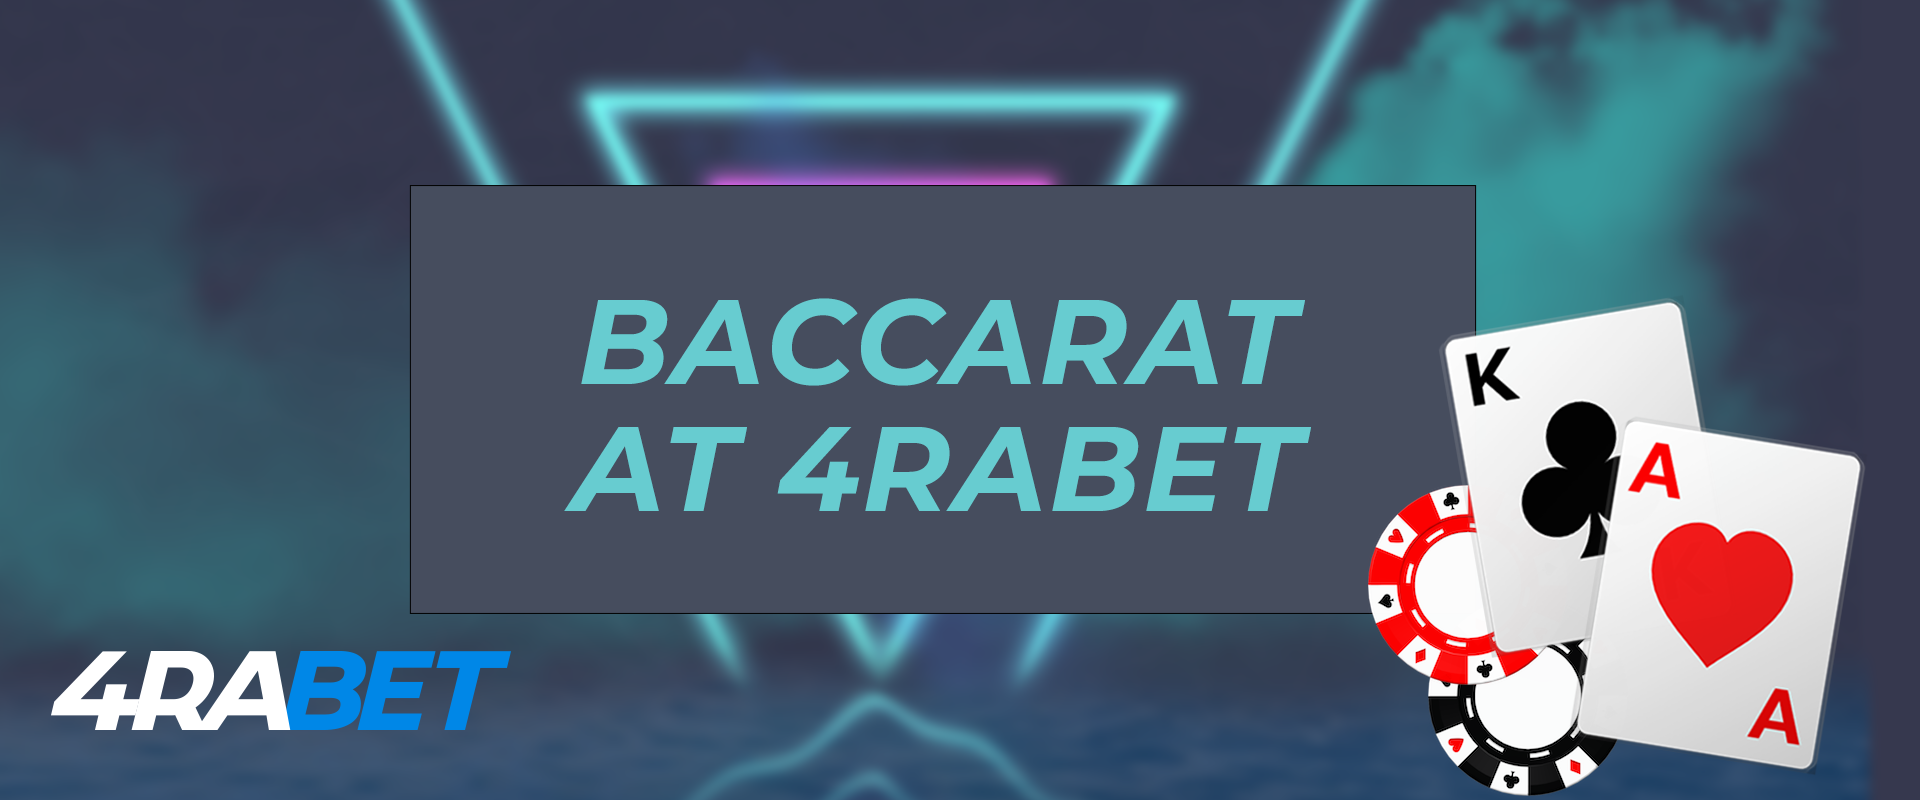 All baccarat games on the 4rabet.